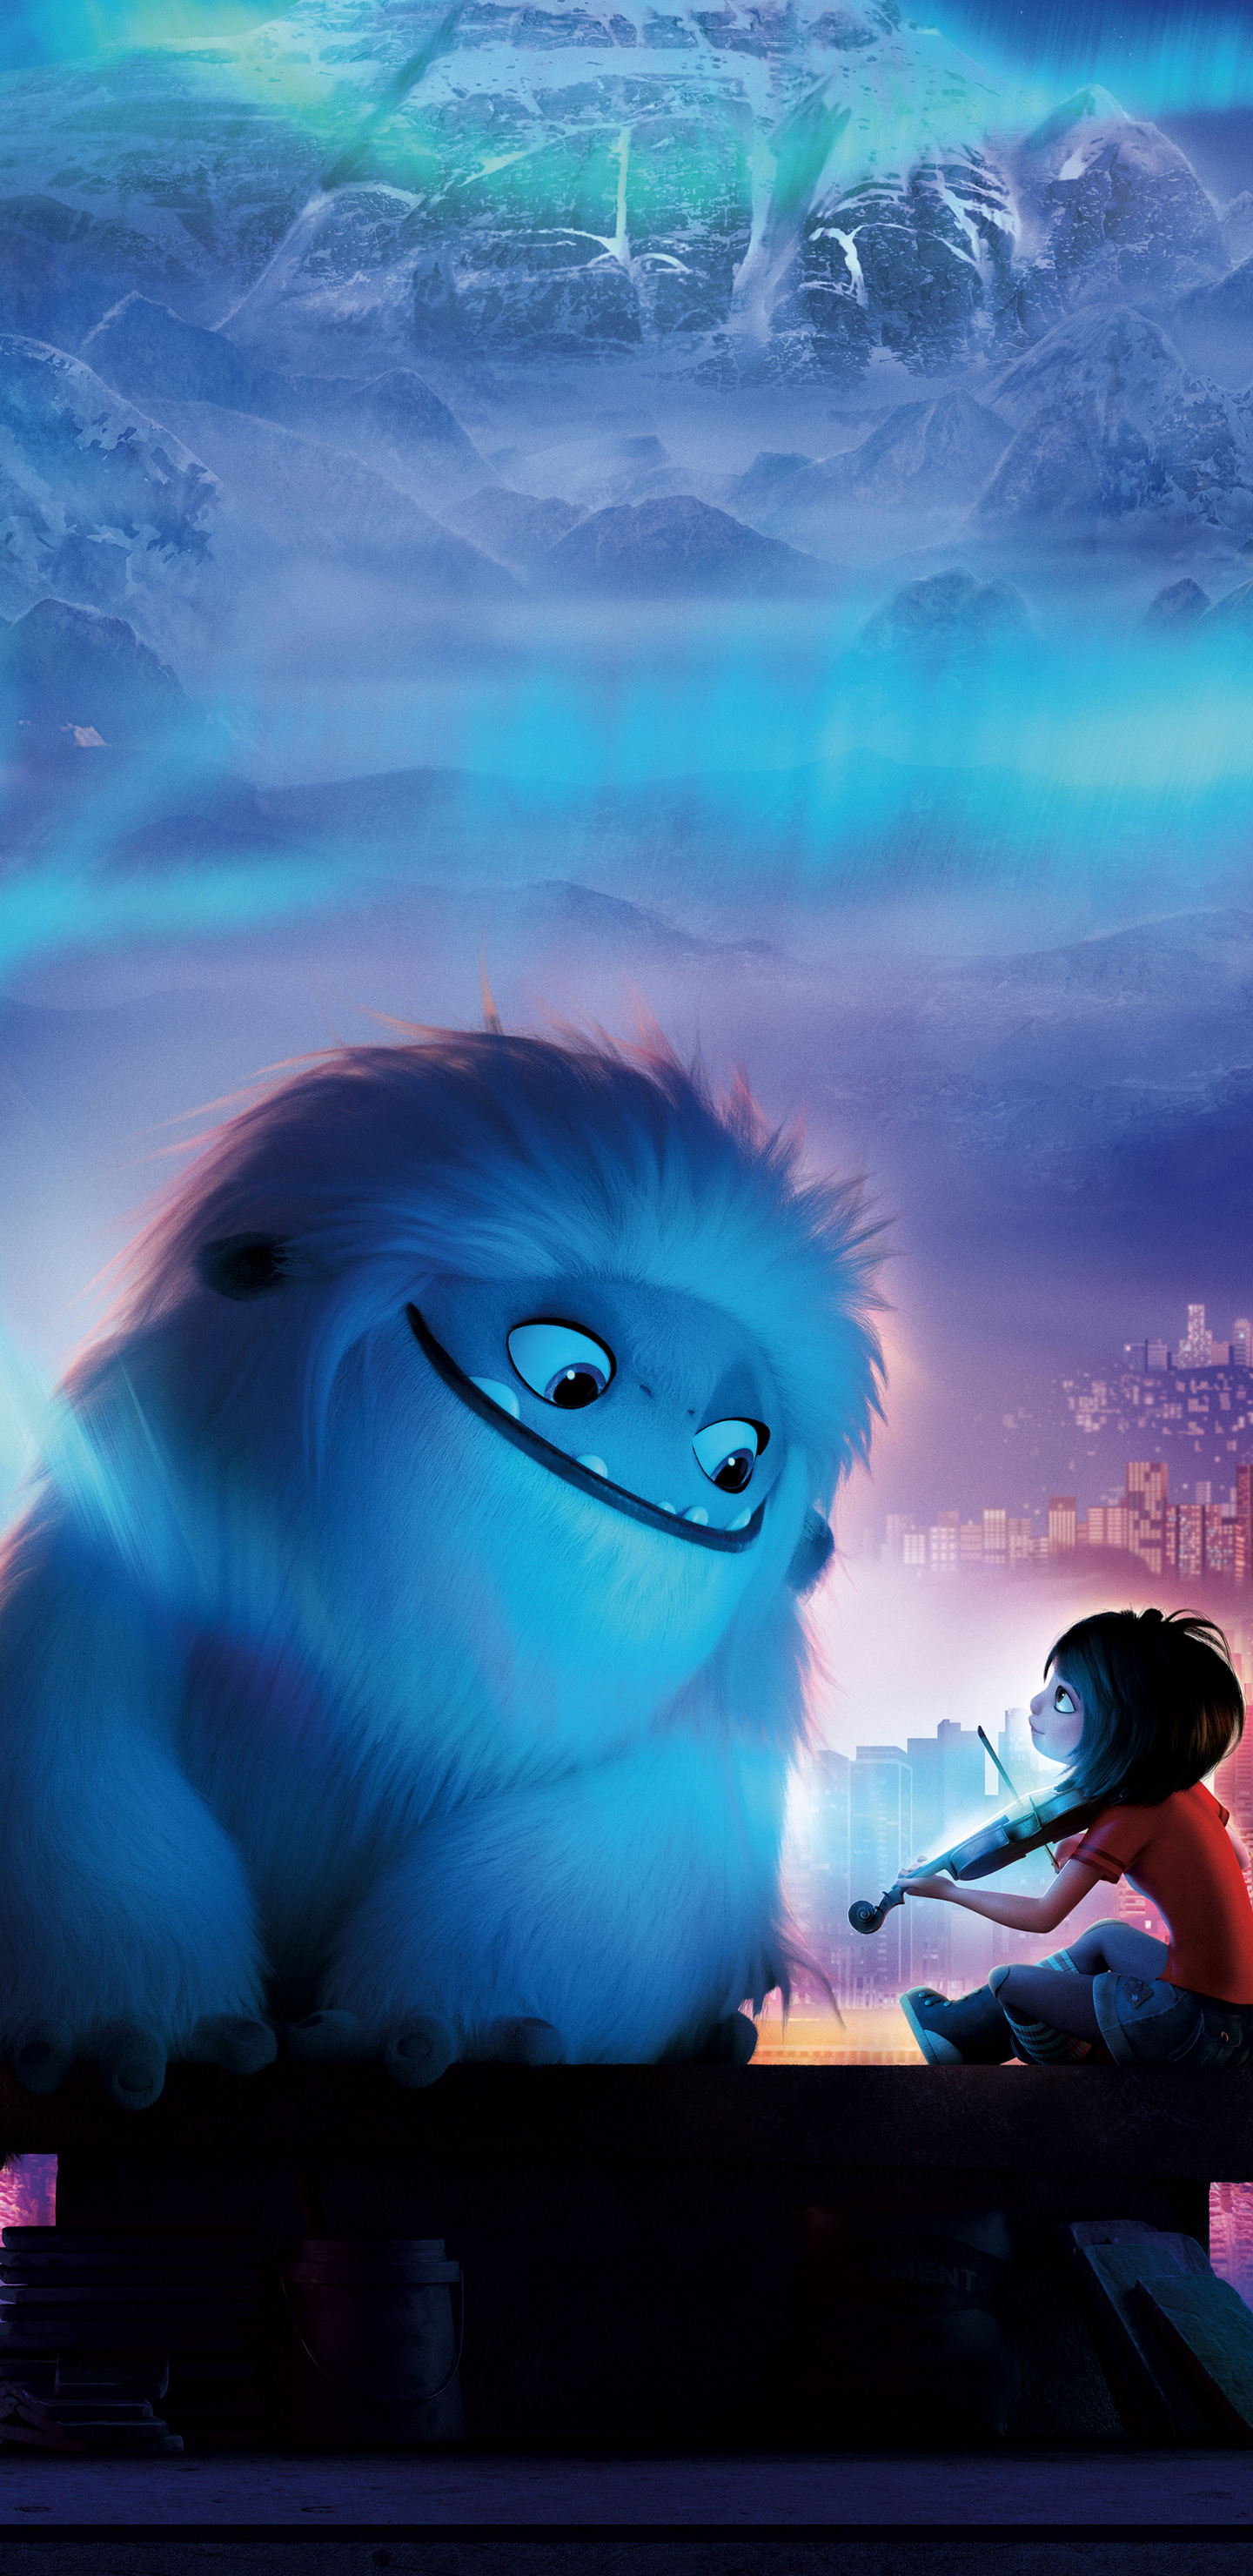 Download wallpaper 1440x2960 abominable, yeti and boy, animation movie, samsung  galaxy s8, samsung galaxy s8 plus, 1440x2960 hd background, 22339